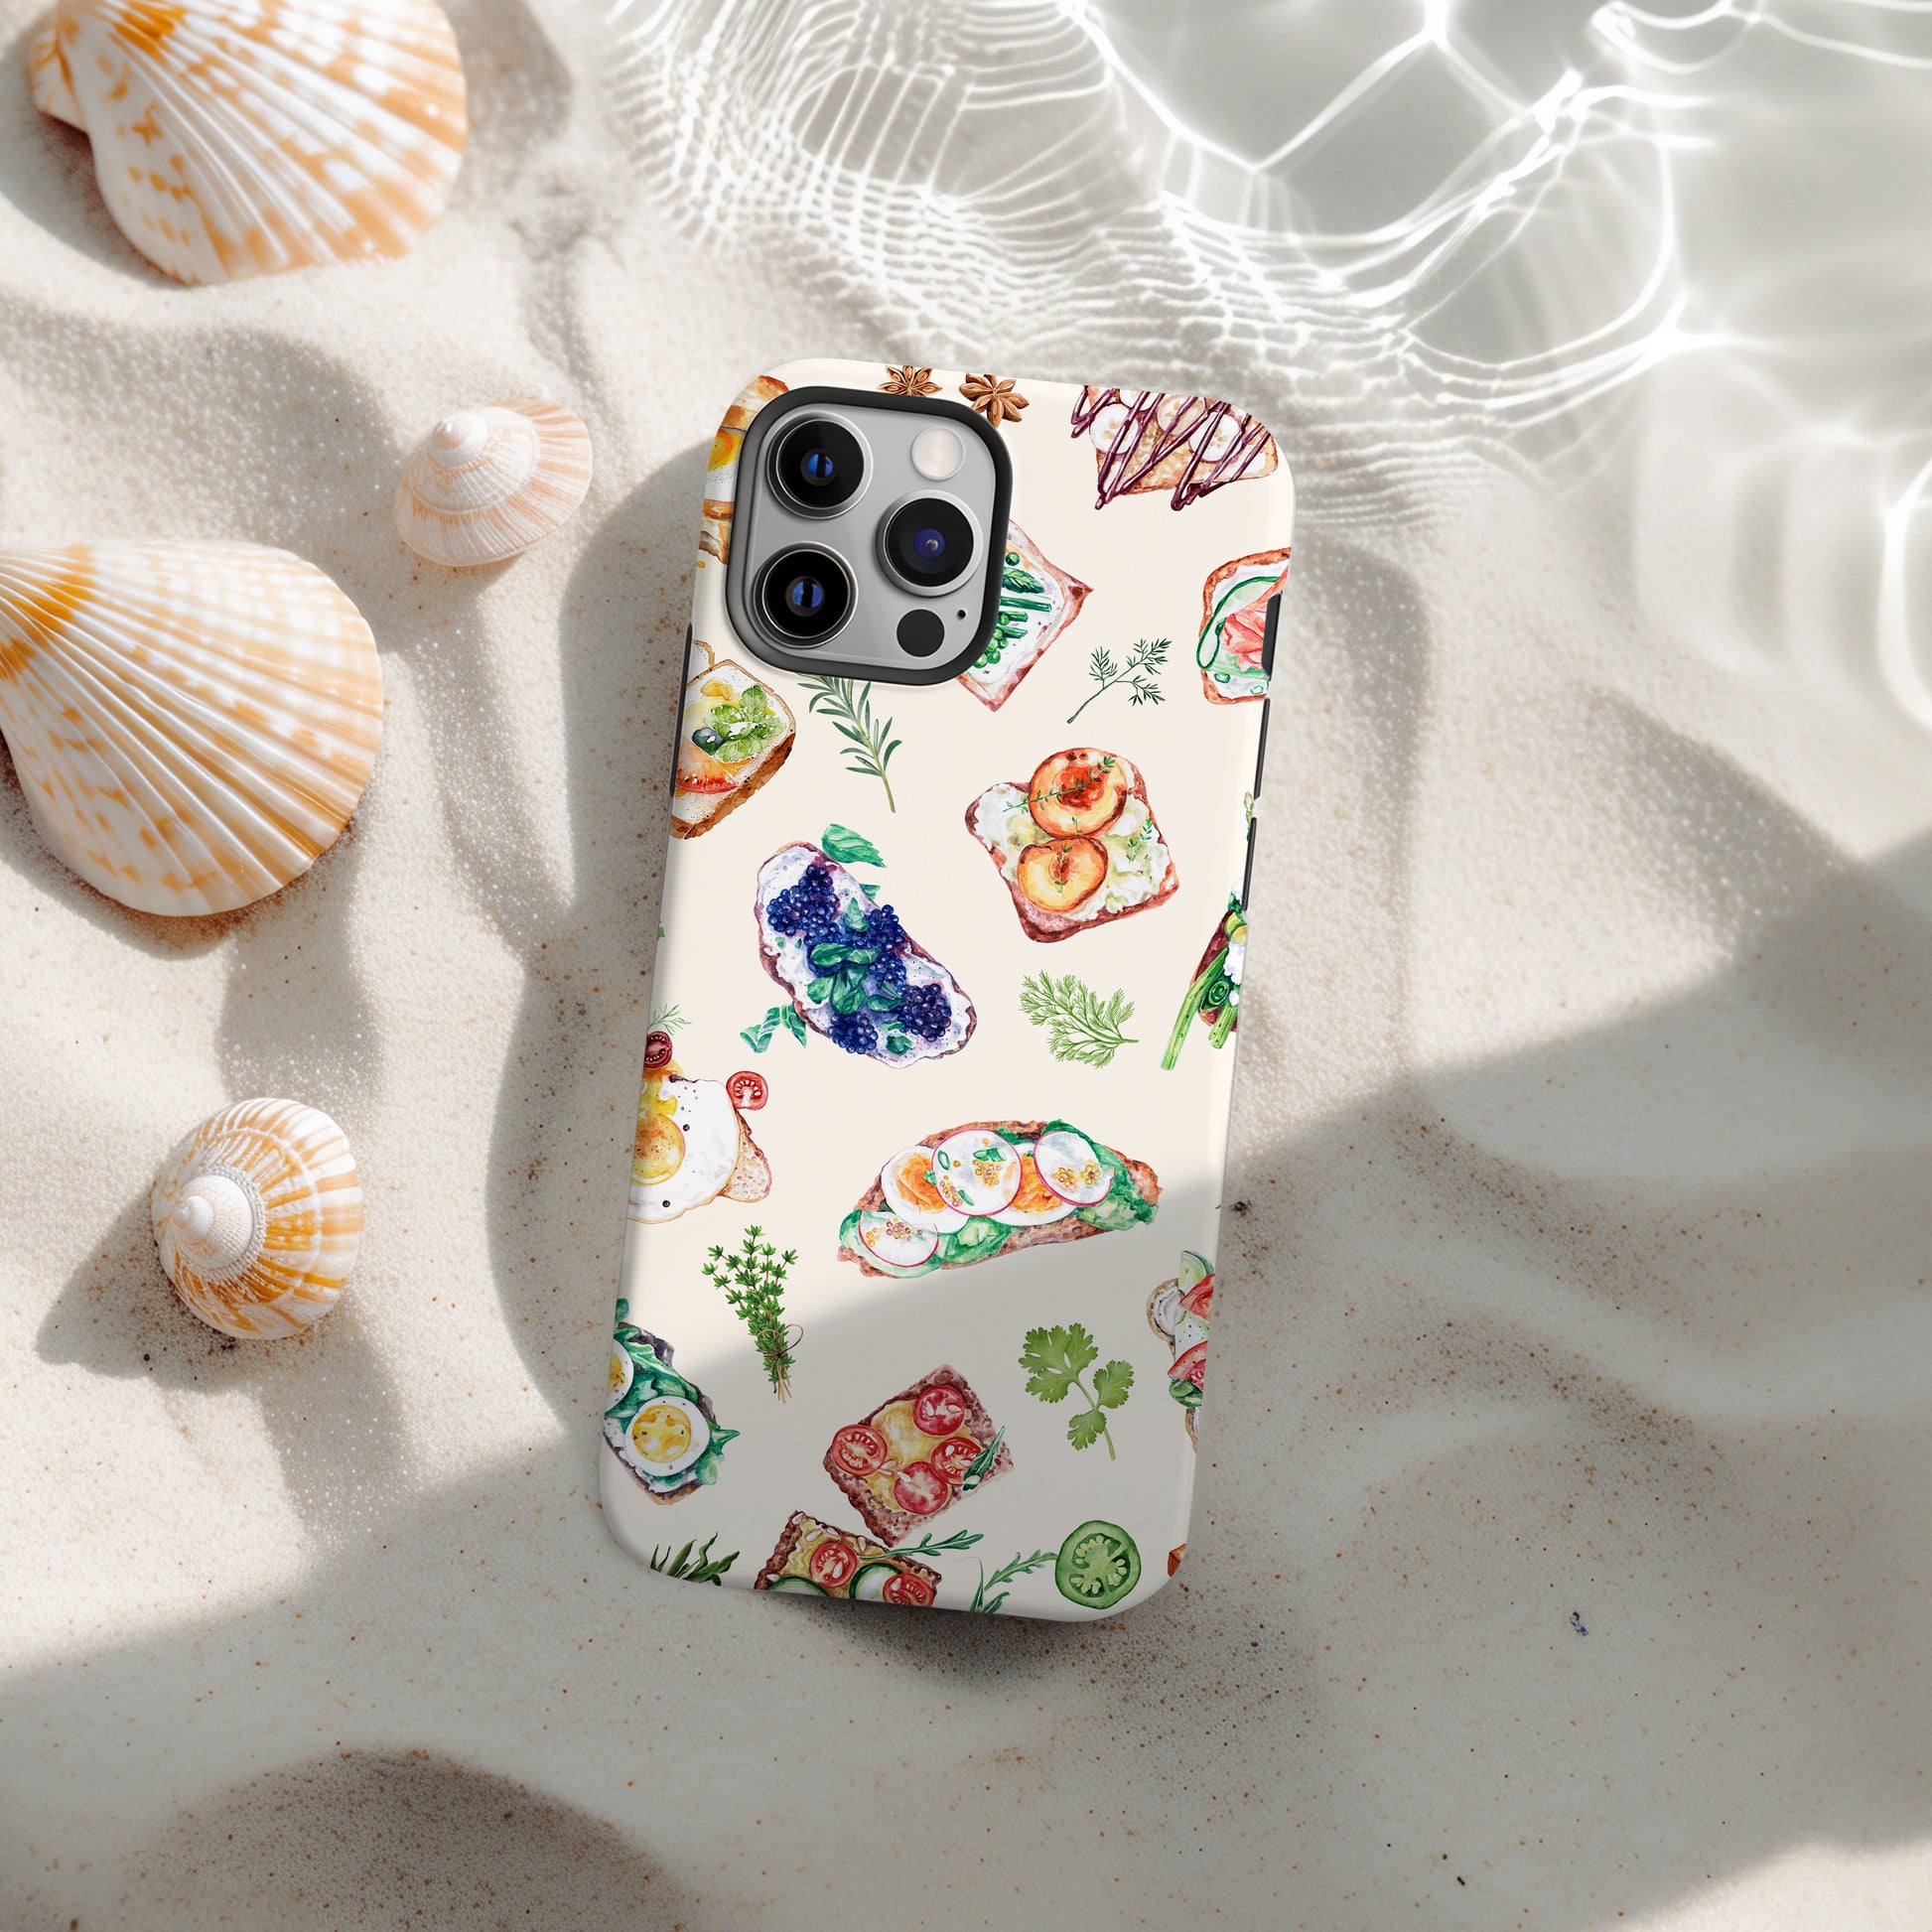 beach view of Sandwich Collage Phone Case is uniquely designed with delicate watercolor collage art. Available for both iPhone and Samsung Galaxy, this case artfully combines elements of open faced sandwiches with delicate herbs. Great foodie or chef gift by Artscape Market